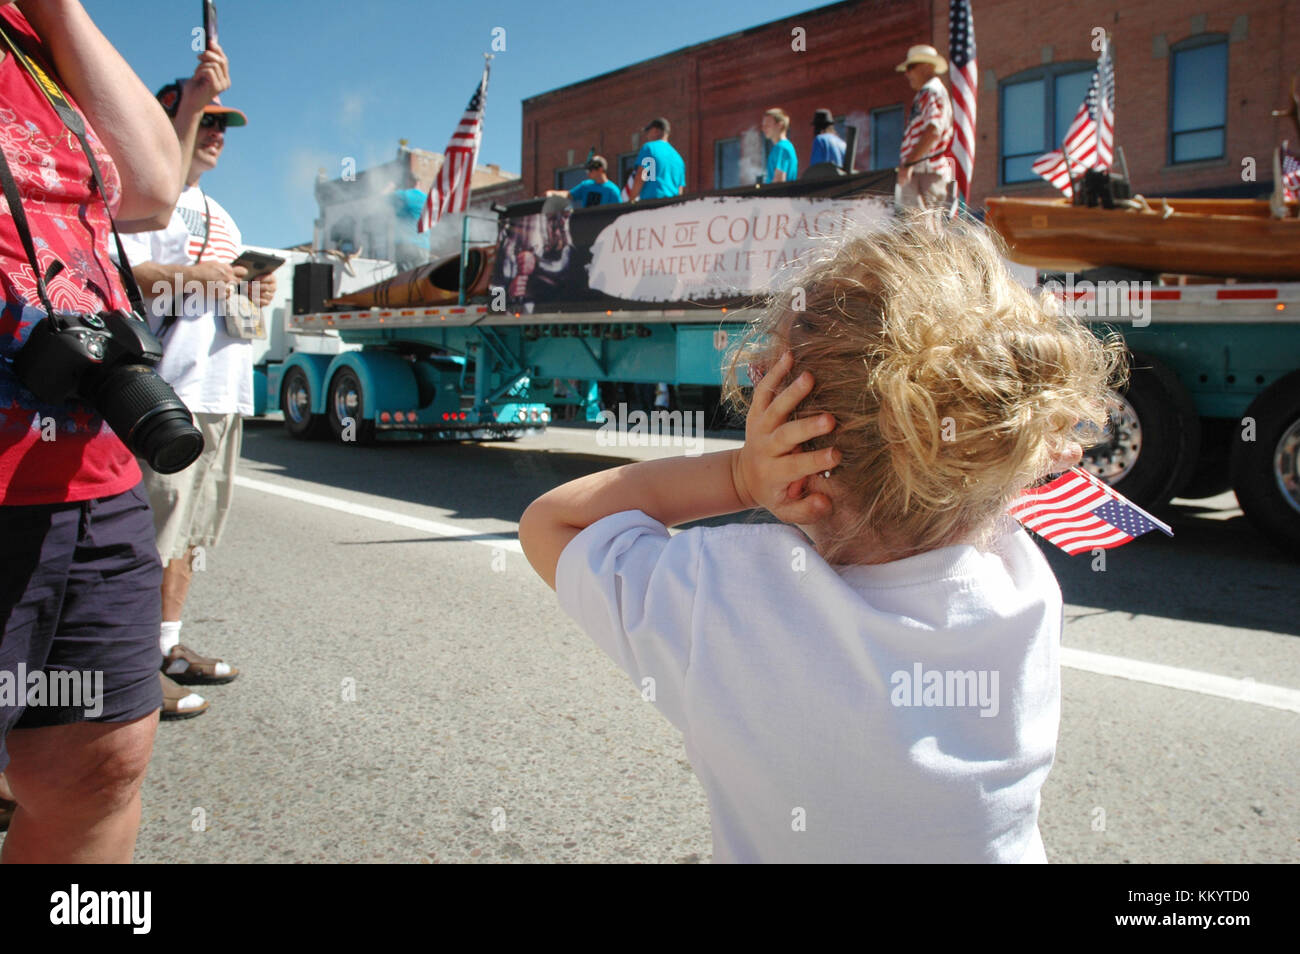 KALISPELL, MT, USA - JULY 4: Girl covers ears after a loud boom during 4th of July Parade in Kalispell, Montana, on July 4, 2016 Stock Photo